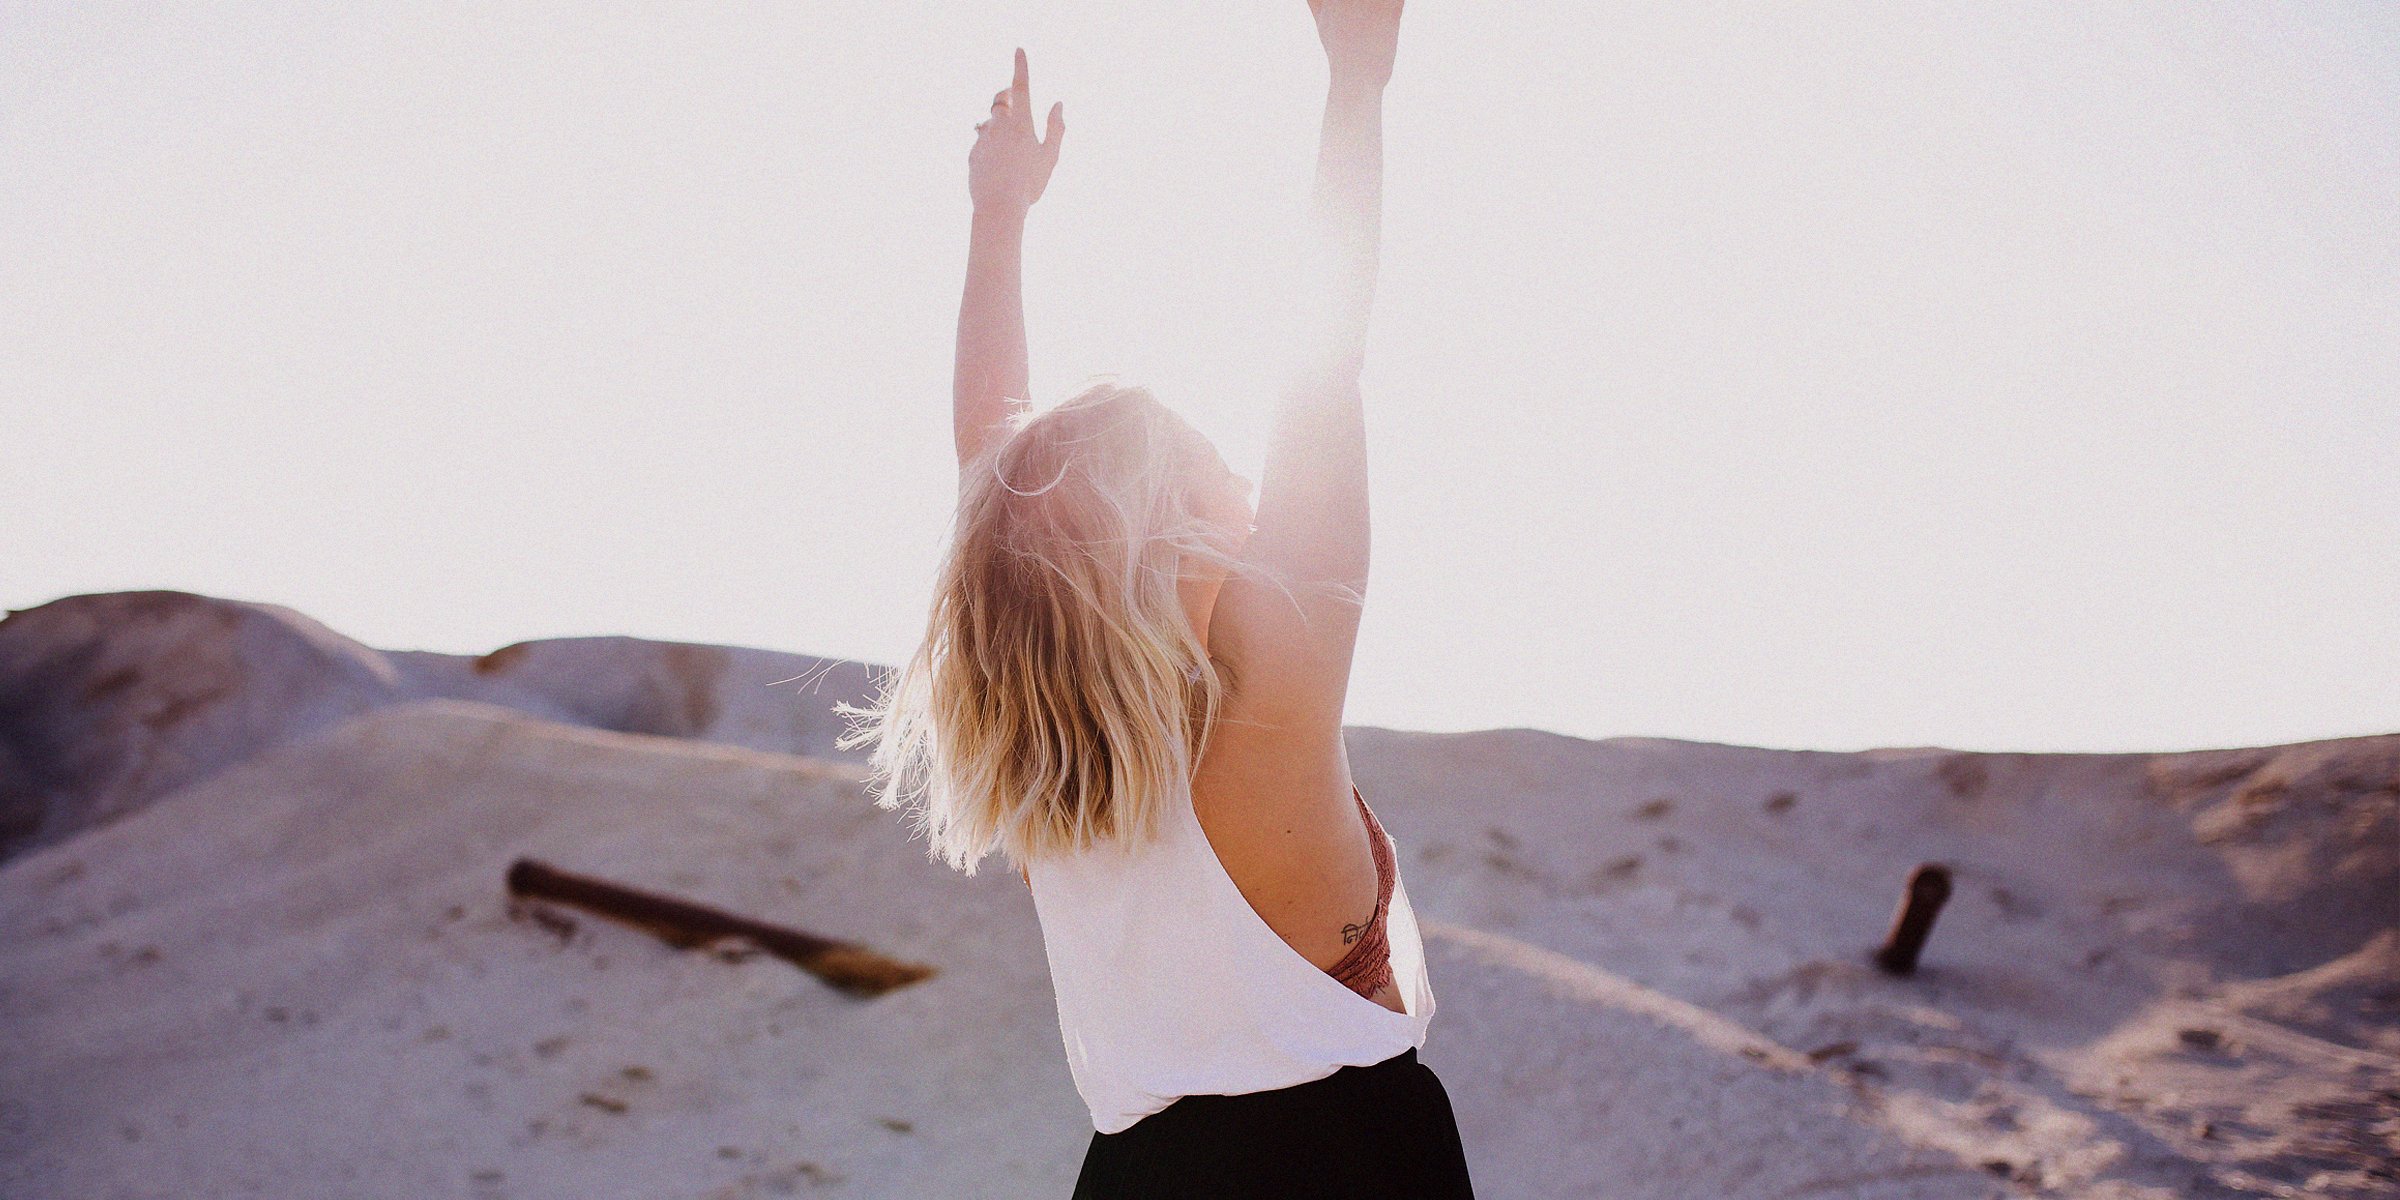 A woman holding her arms up  |  Source: Unsplash